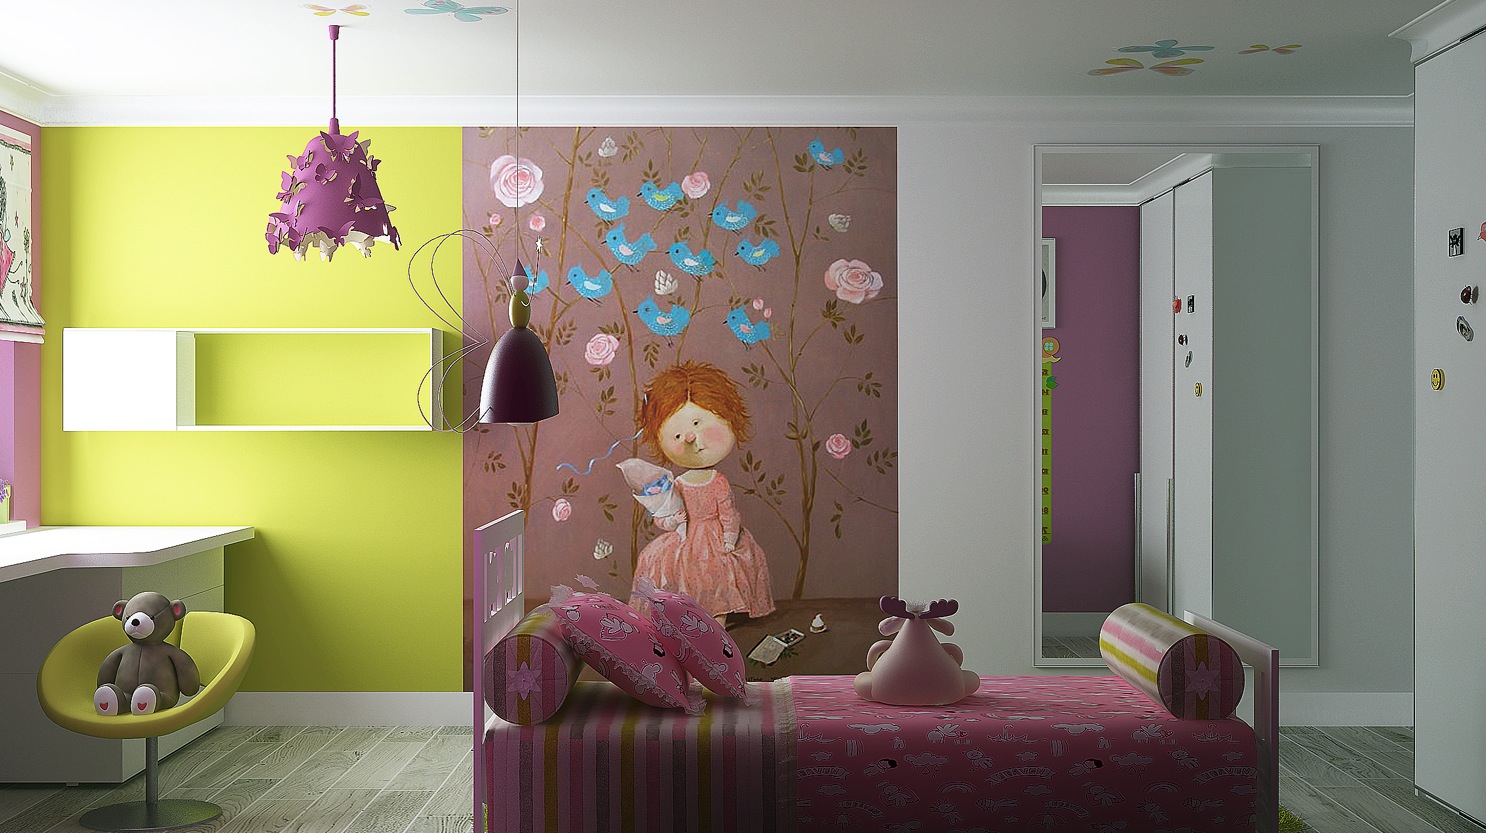 Via Kate ChelyustnikovaA character themed wall mural adds quirkiness